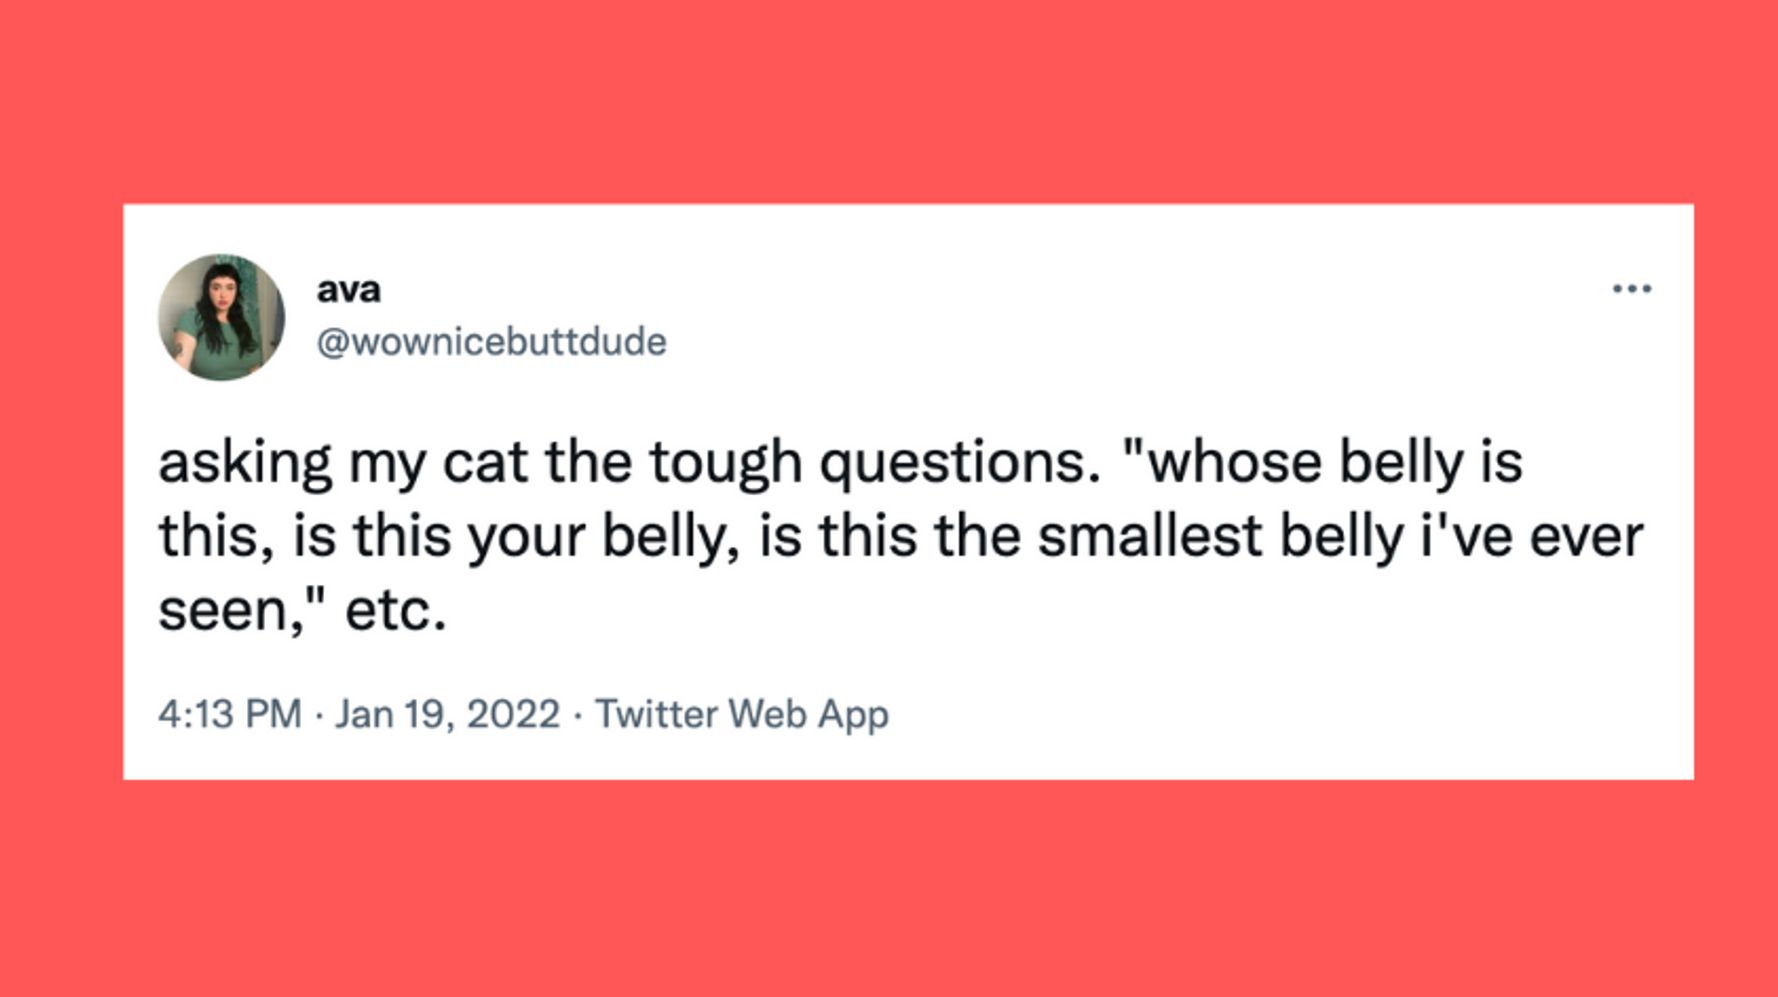 21 Of The Funniest Tweets About Cats And Dogs This Week (Jan. 15-21)